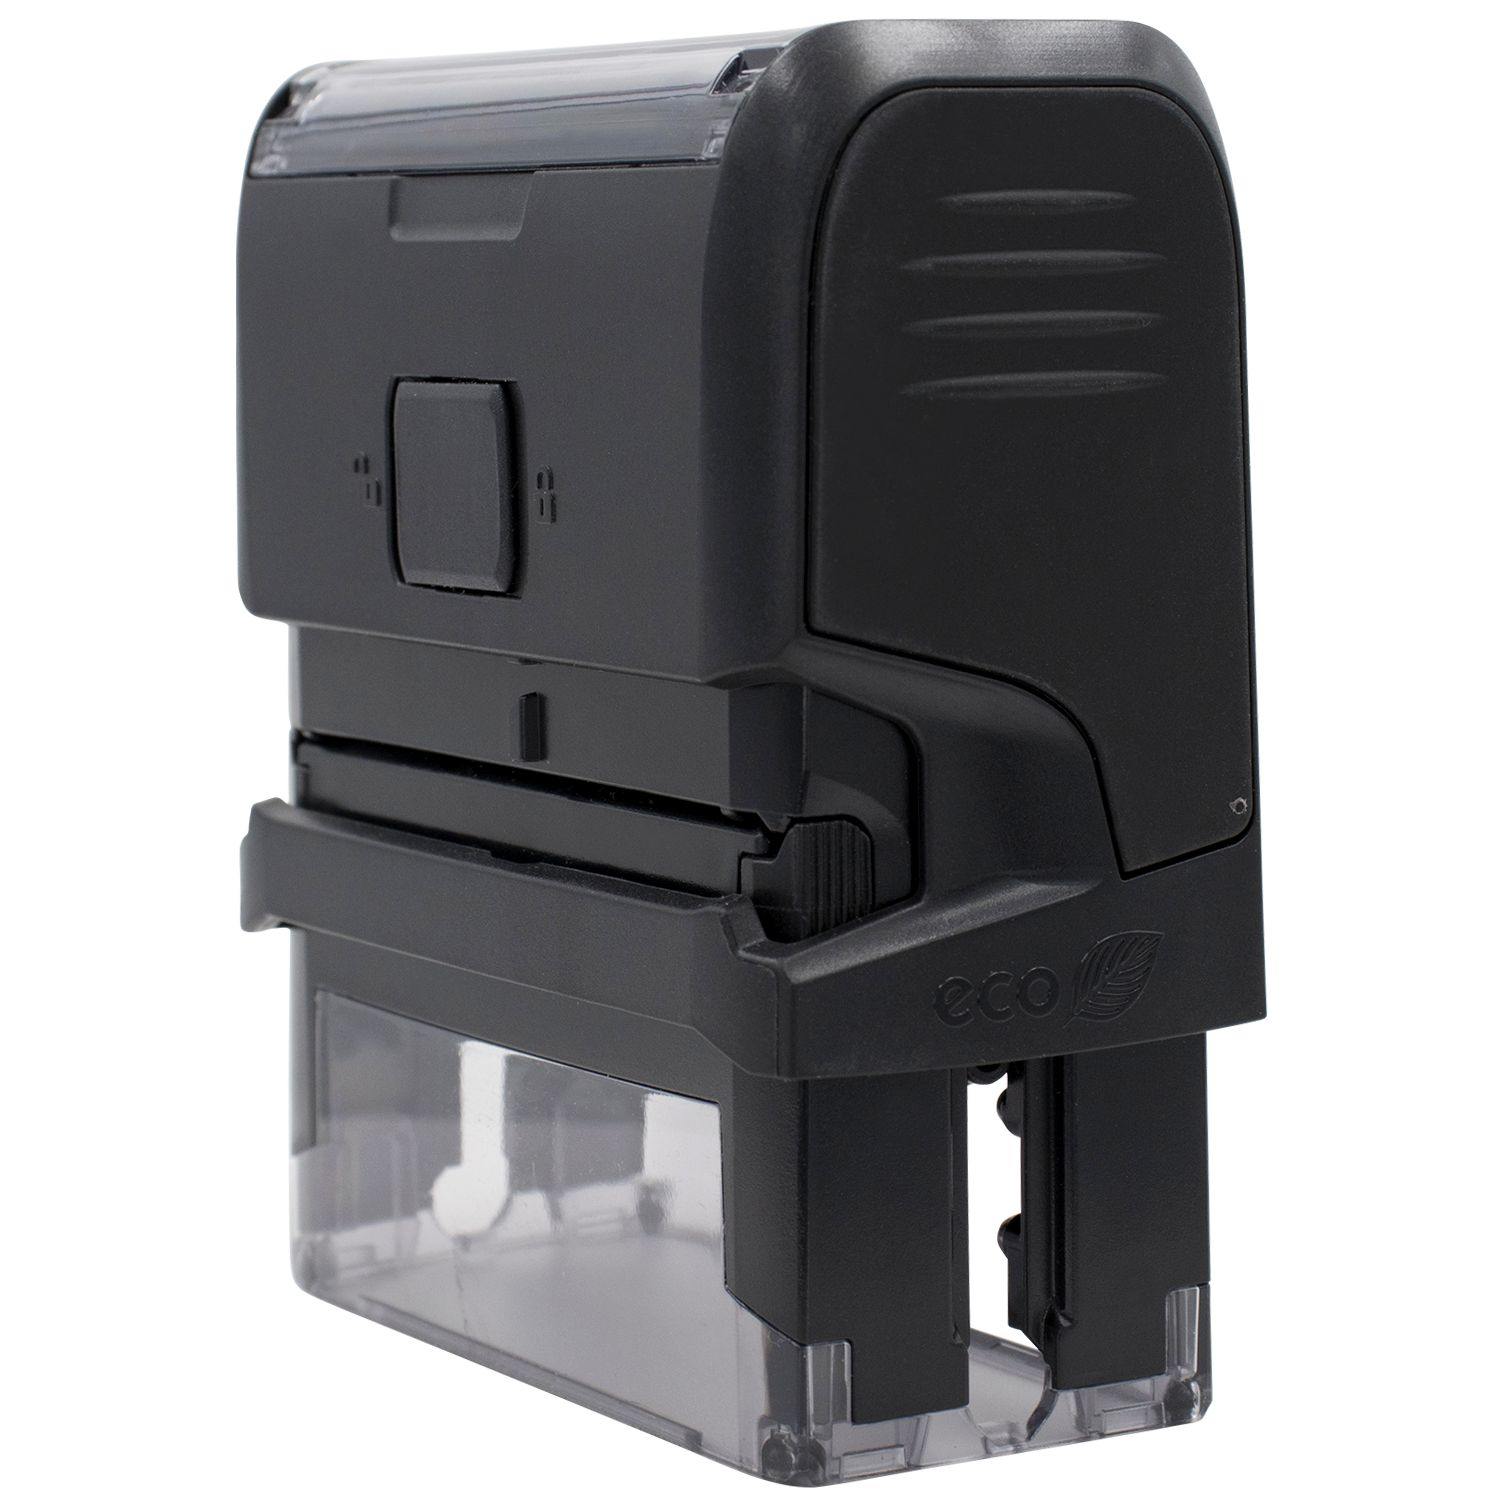 Large Self-Inking Narrow Font Urgent Stamp - Engineer Seal Stamps - Brand_Trodat, Impression Size_Large, Stamp Type_Self-Inking Stamp, Type of Use_General, Type of Use_Office